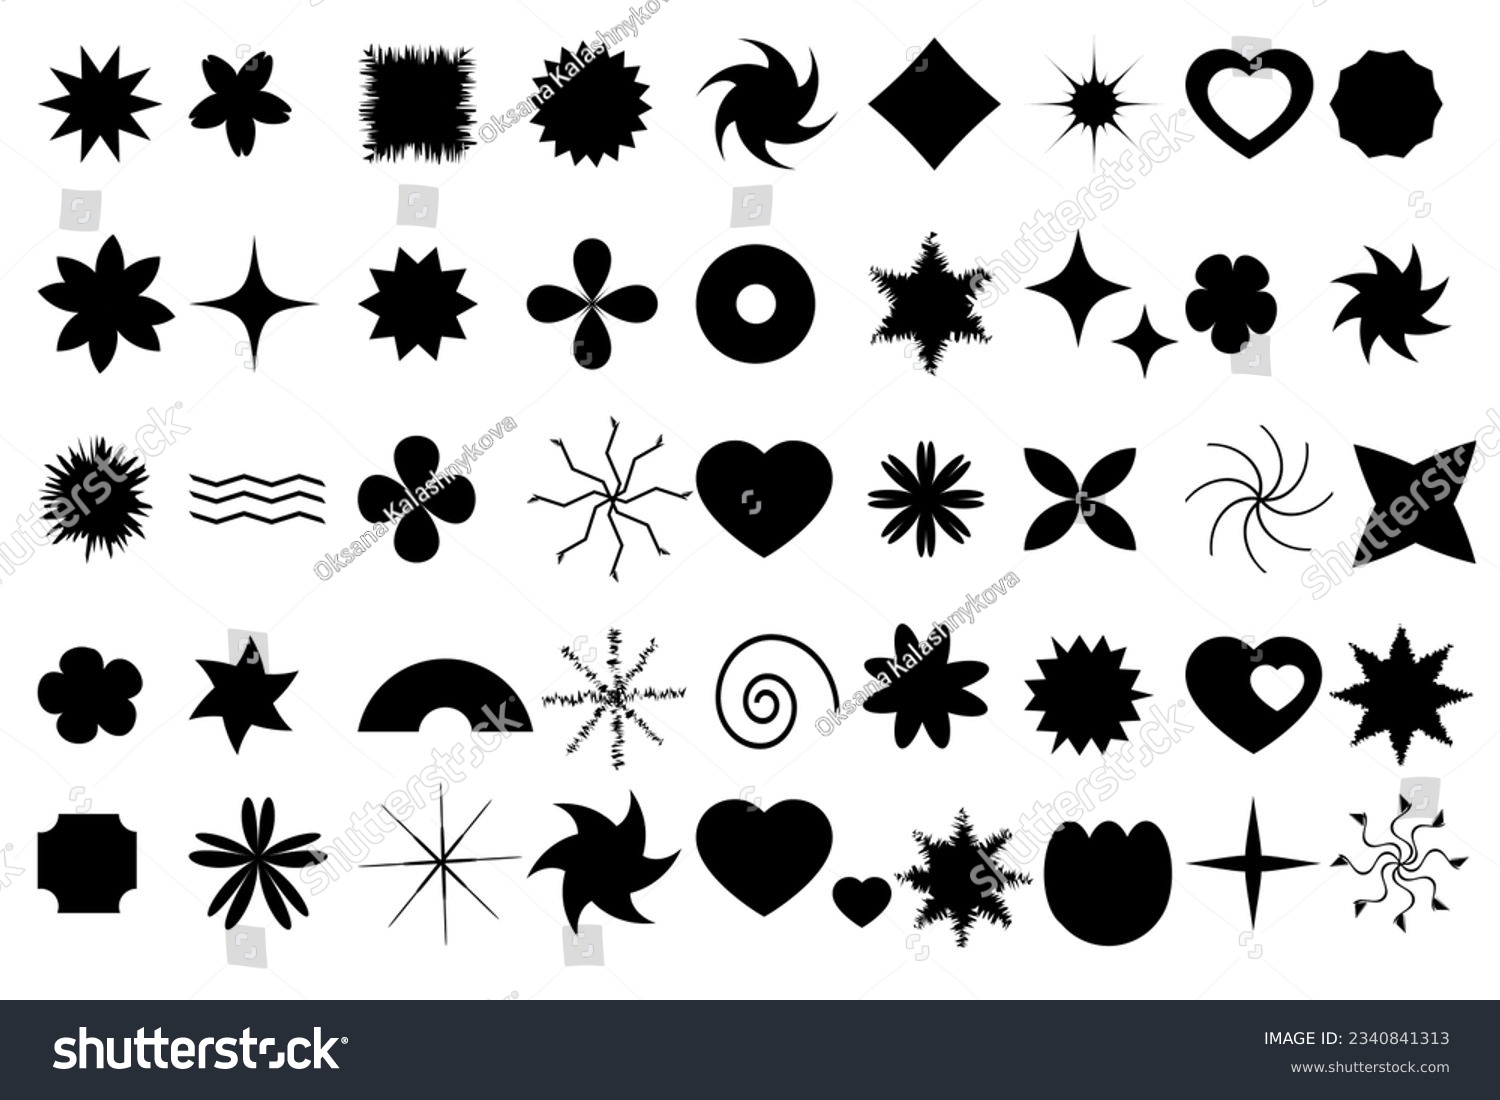 SVG of Black flowers and shapes icons. Daisy floral organic form cloud star and other elements in trendy playful brutal style. Vector illustrations svg